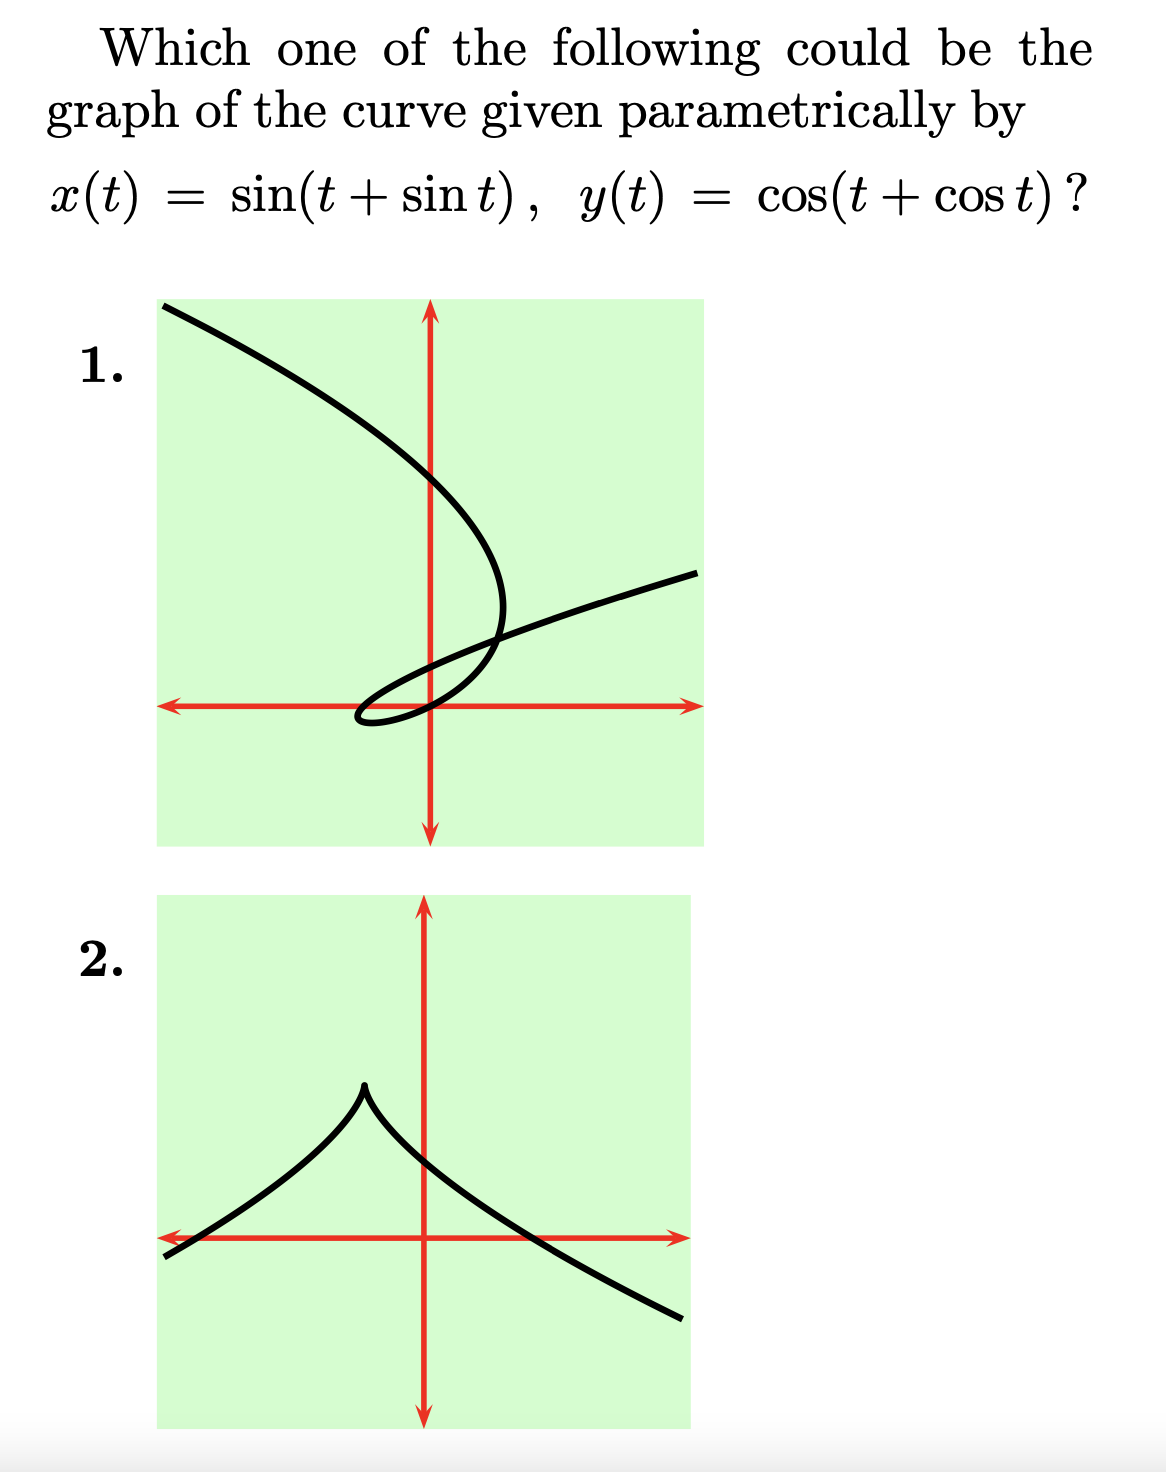 Which one of the following could be the
graph of the curve given parametrically by
x(t) = sin(t + sin t), y(t) = cos(t + cos t) ?
1.
2.
